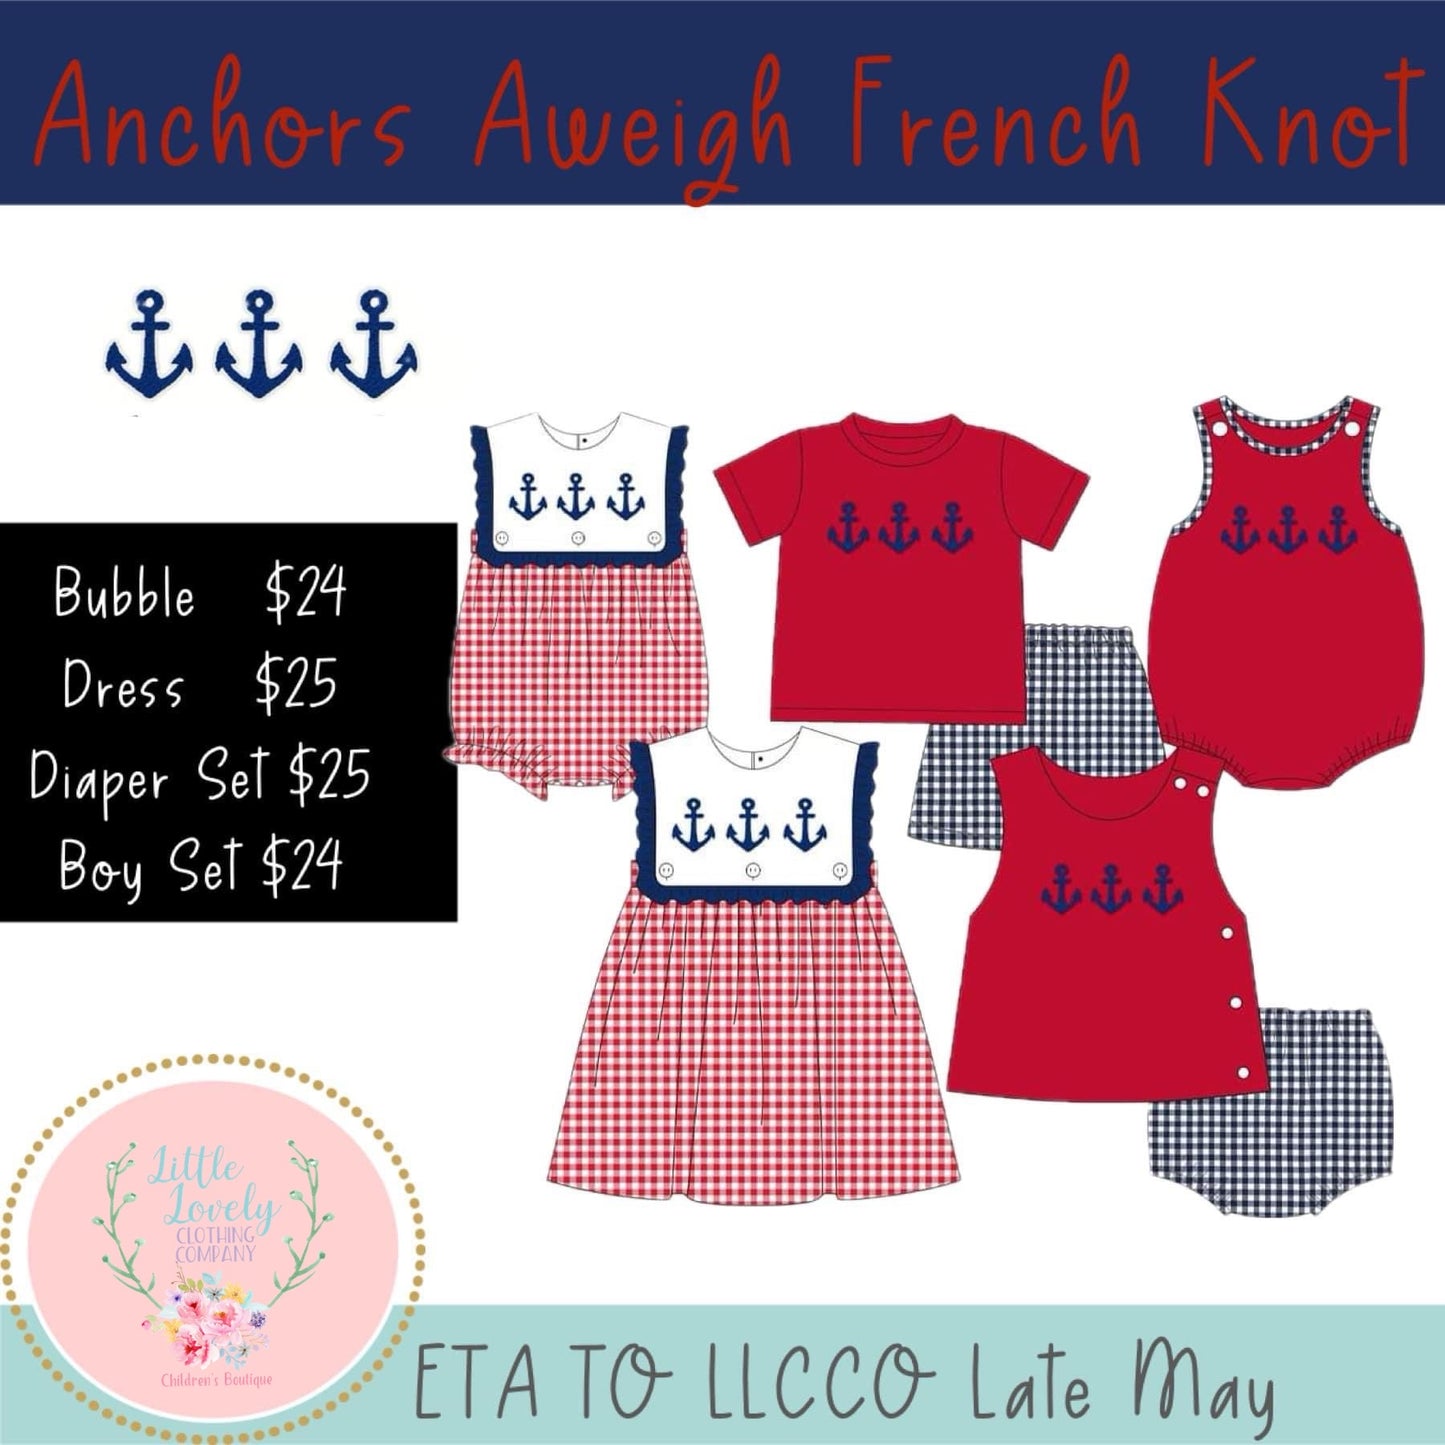 Anchors Aweigh French Knot Collection, Presale ETA: Late May to LLCCO, then to customers